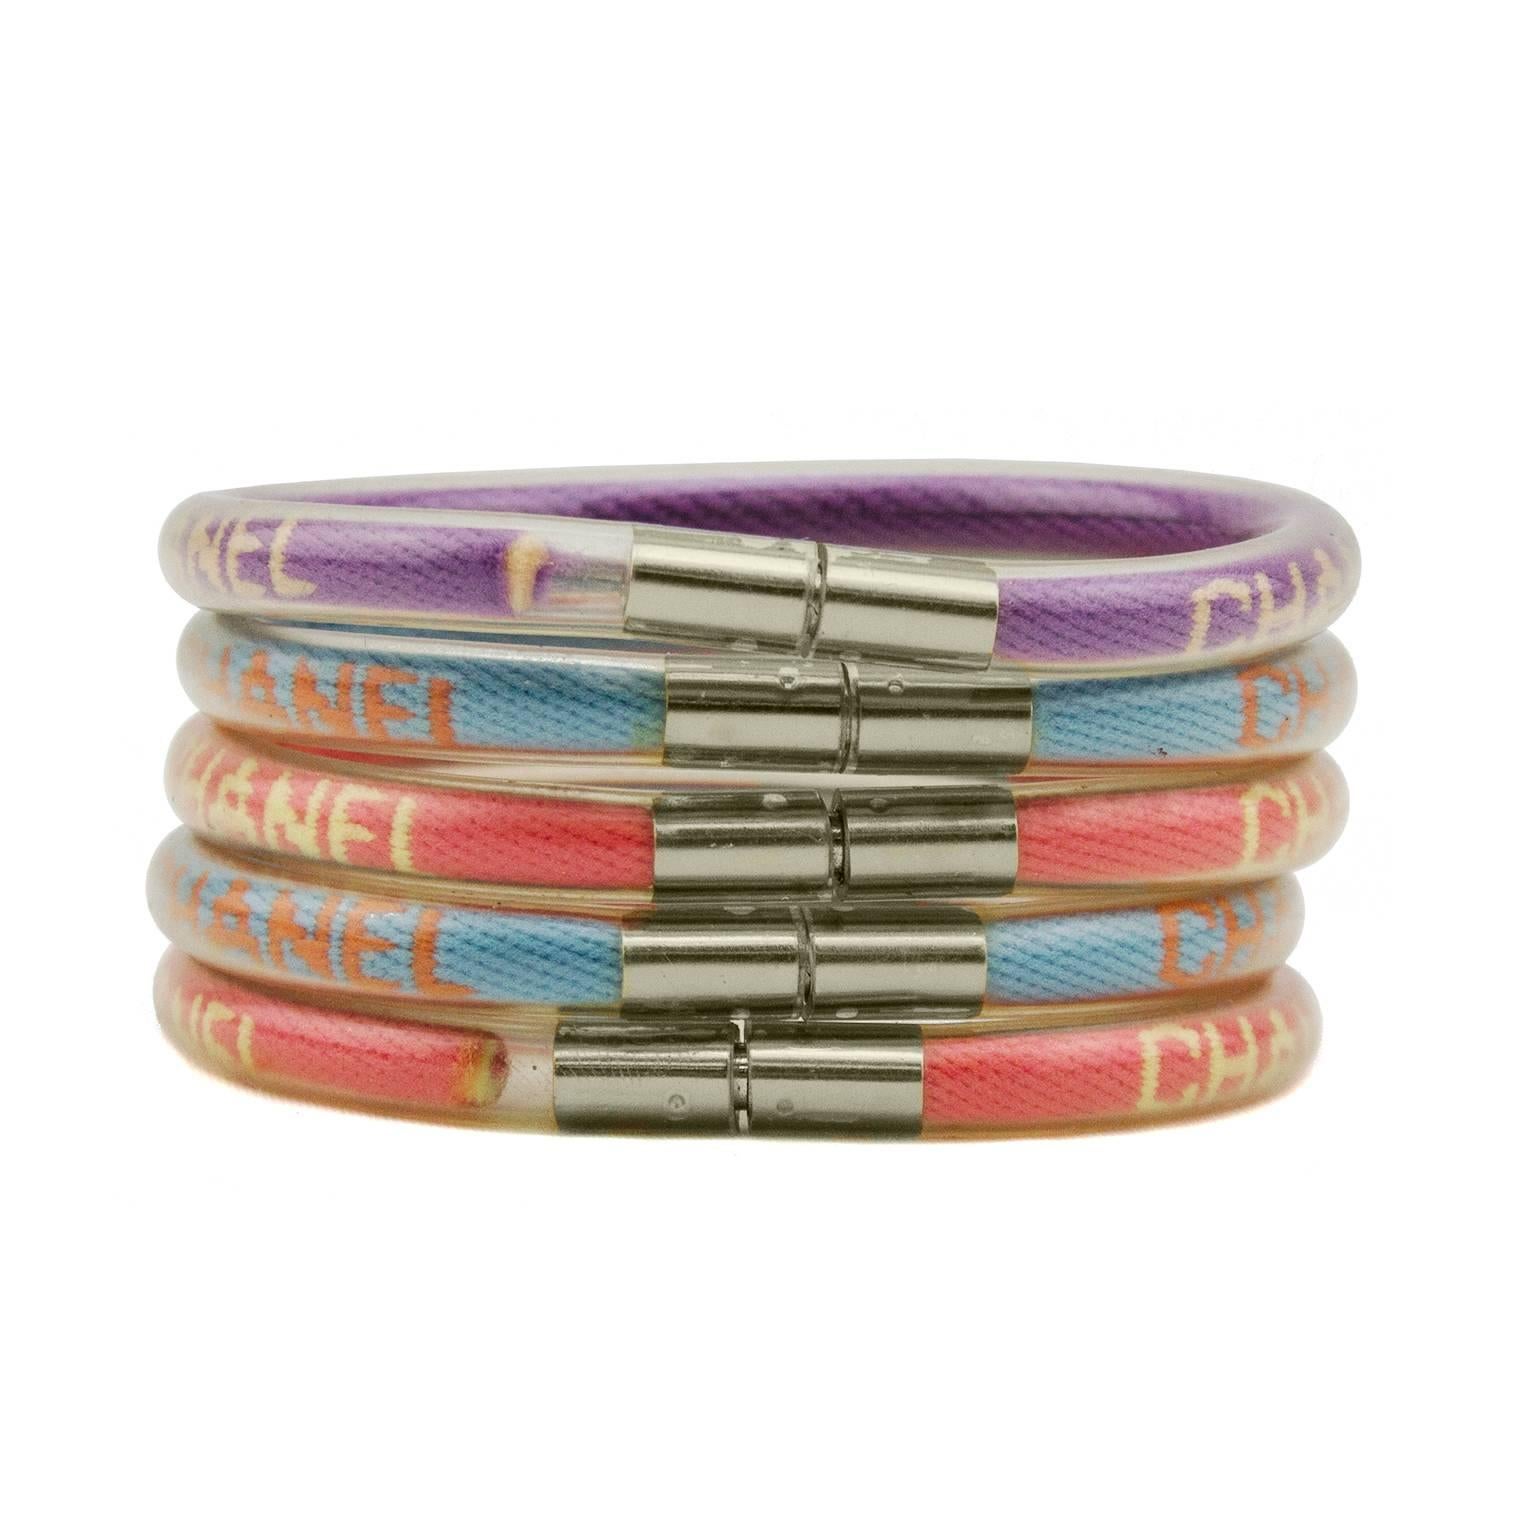 Super cute set Chanel bracelets from 2000. Five bright mutli color woven bracelets incapsulated in transparent PVC with silver hardware. Magnetic tube clasp. Small silver Chanel brand markings on interior. Two blue, two coral and one purple. Can be